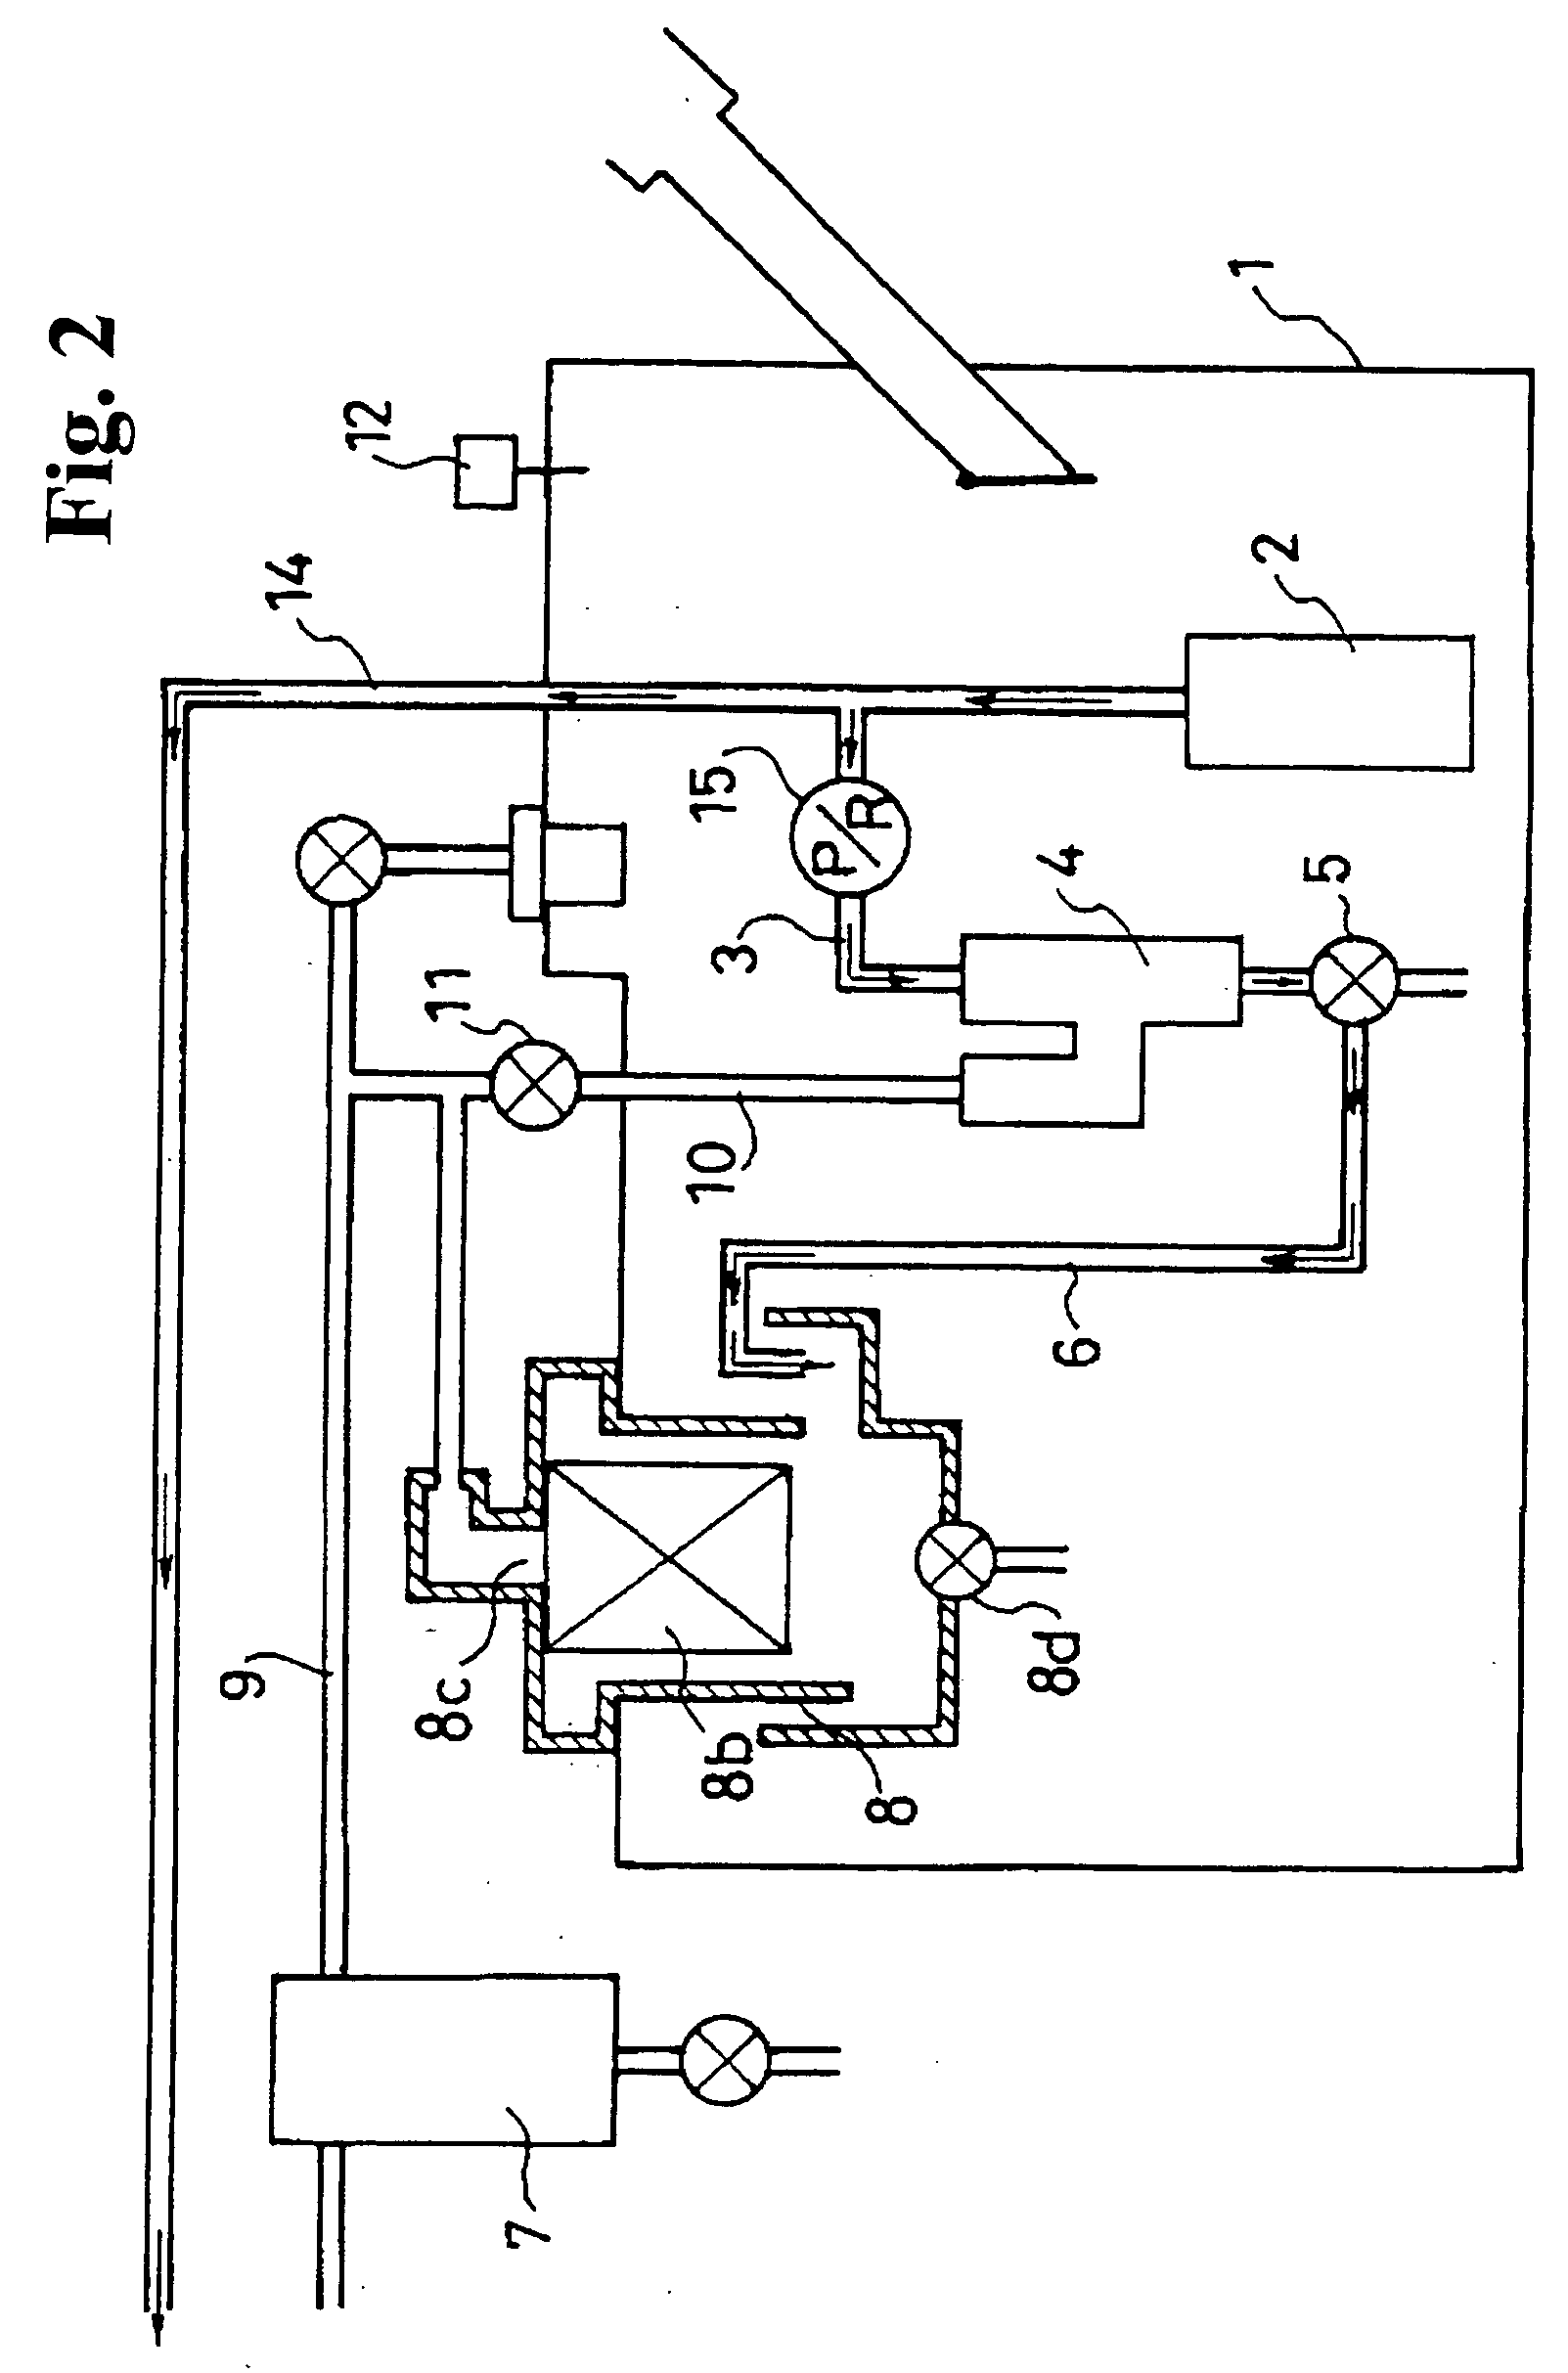 Fuel evaporation gas leakage detecting system and method of detecting fuel evaporation gas leakage